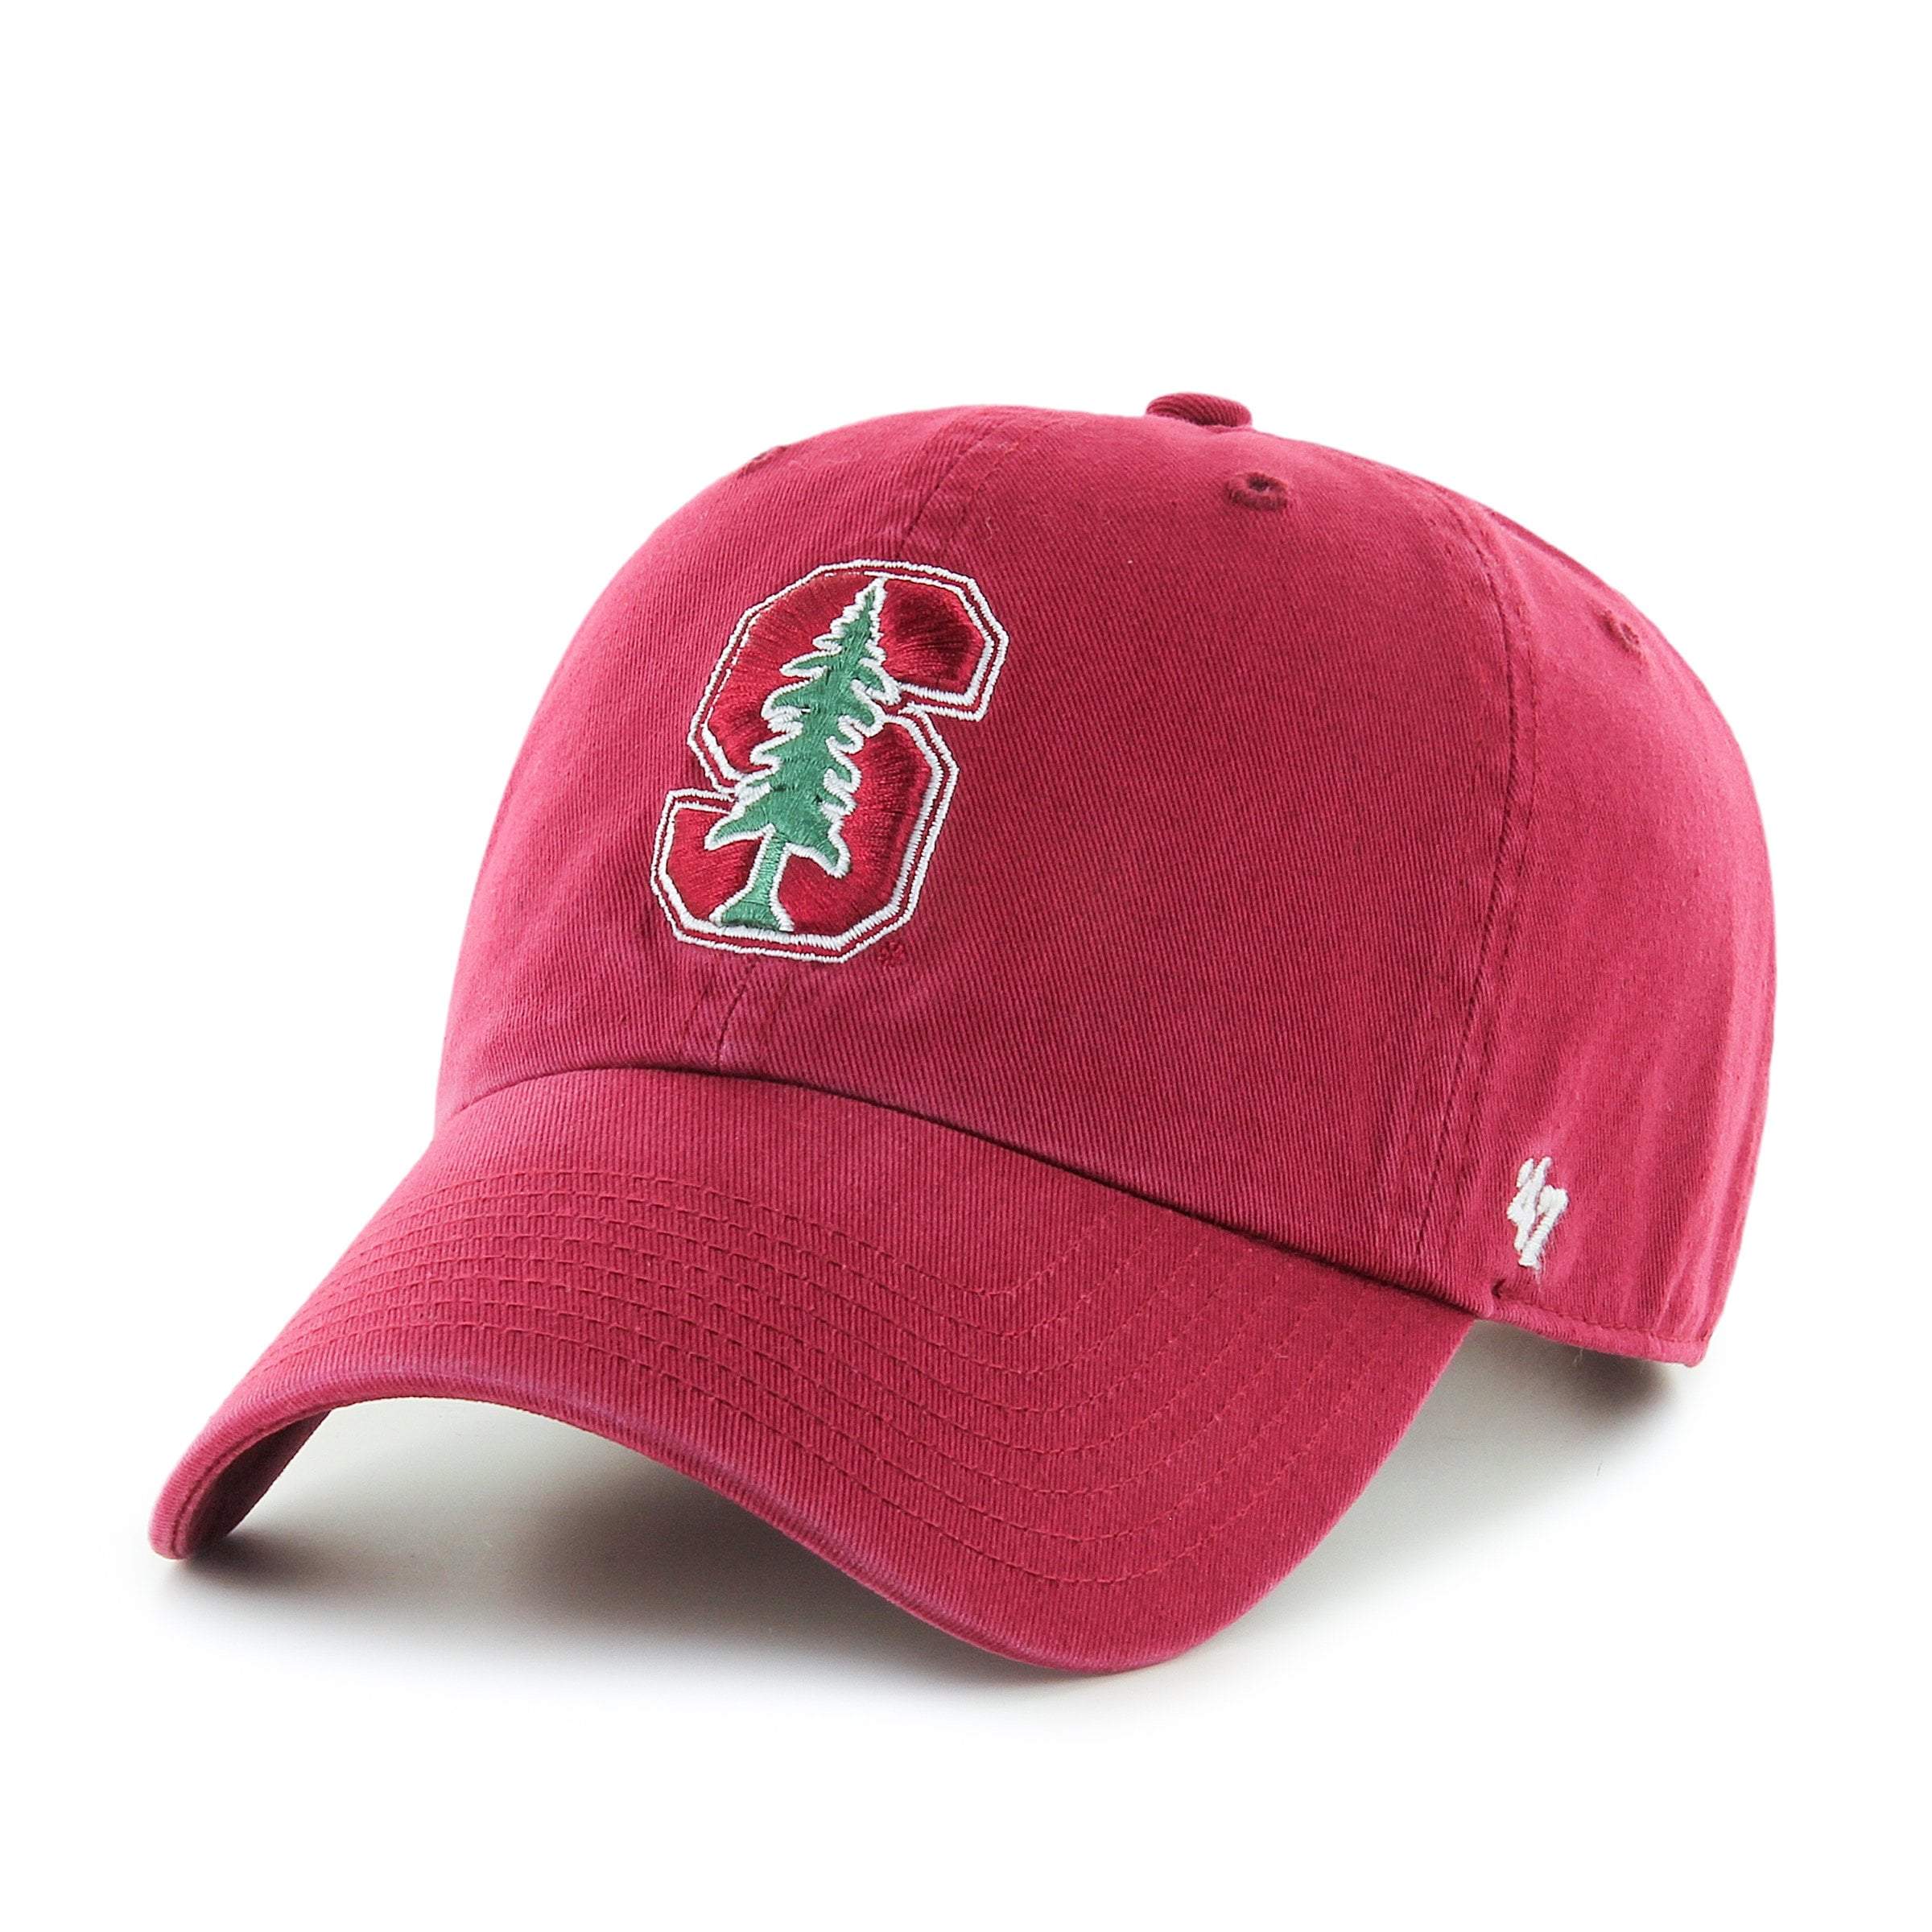 STANFORD CARDINAL '47 CLEAN UP